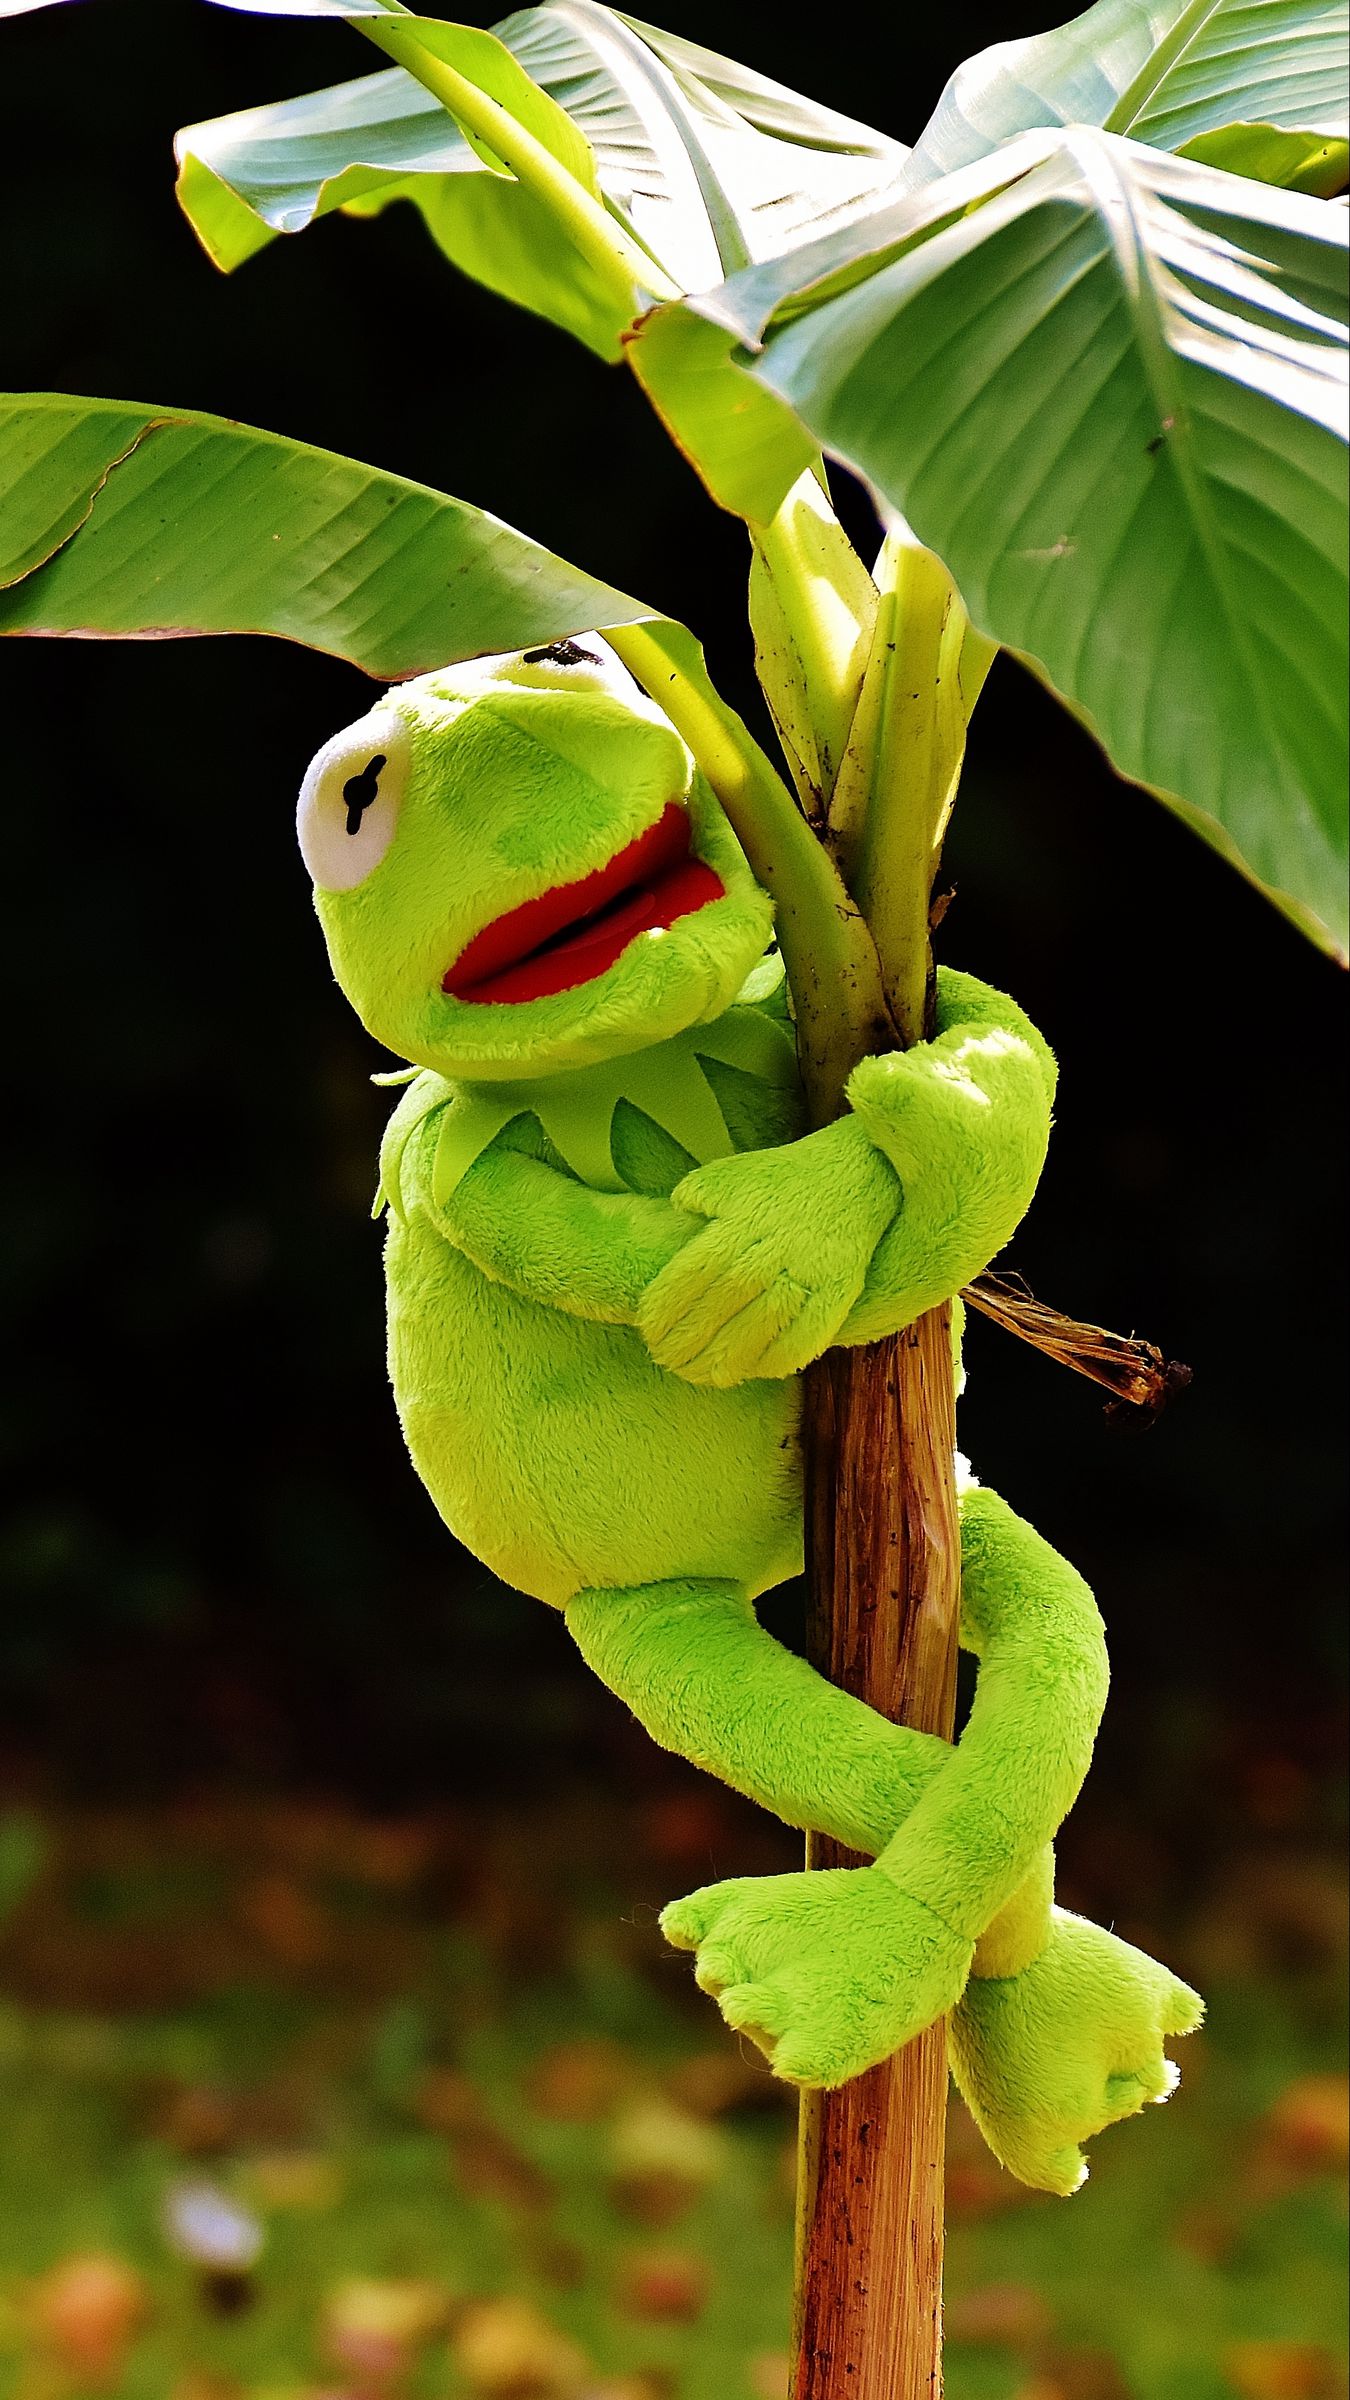 Download wallpaper 1350x2400 toy, kermit the frog, plant iphone  8+/7+/6s+/6+ for parallax hd background